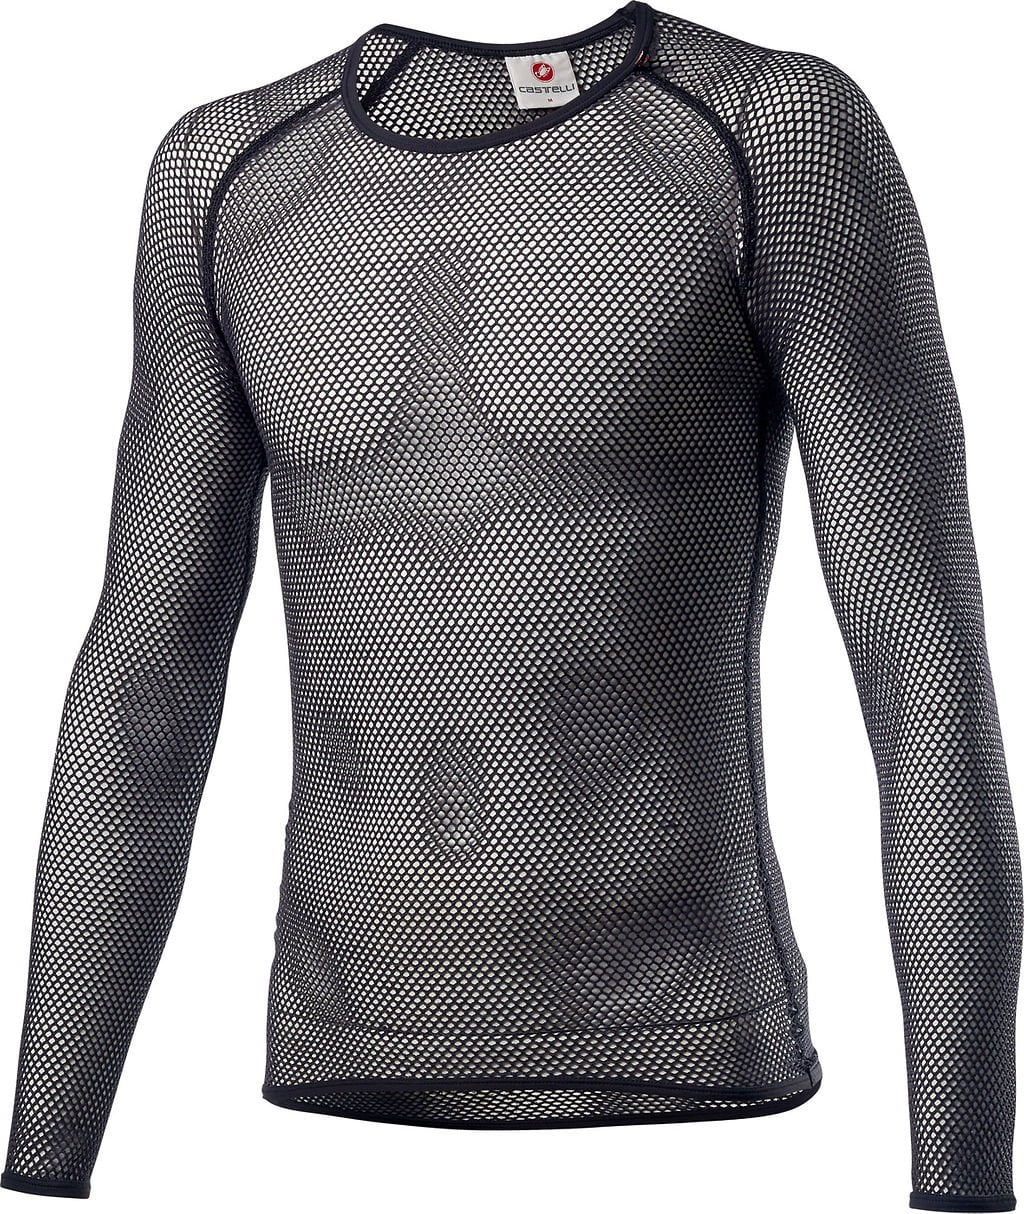 Miracolo Wool Long Sleeve Cycling Base Layer Base Layer, for men, size XL